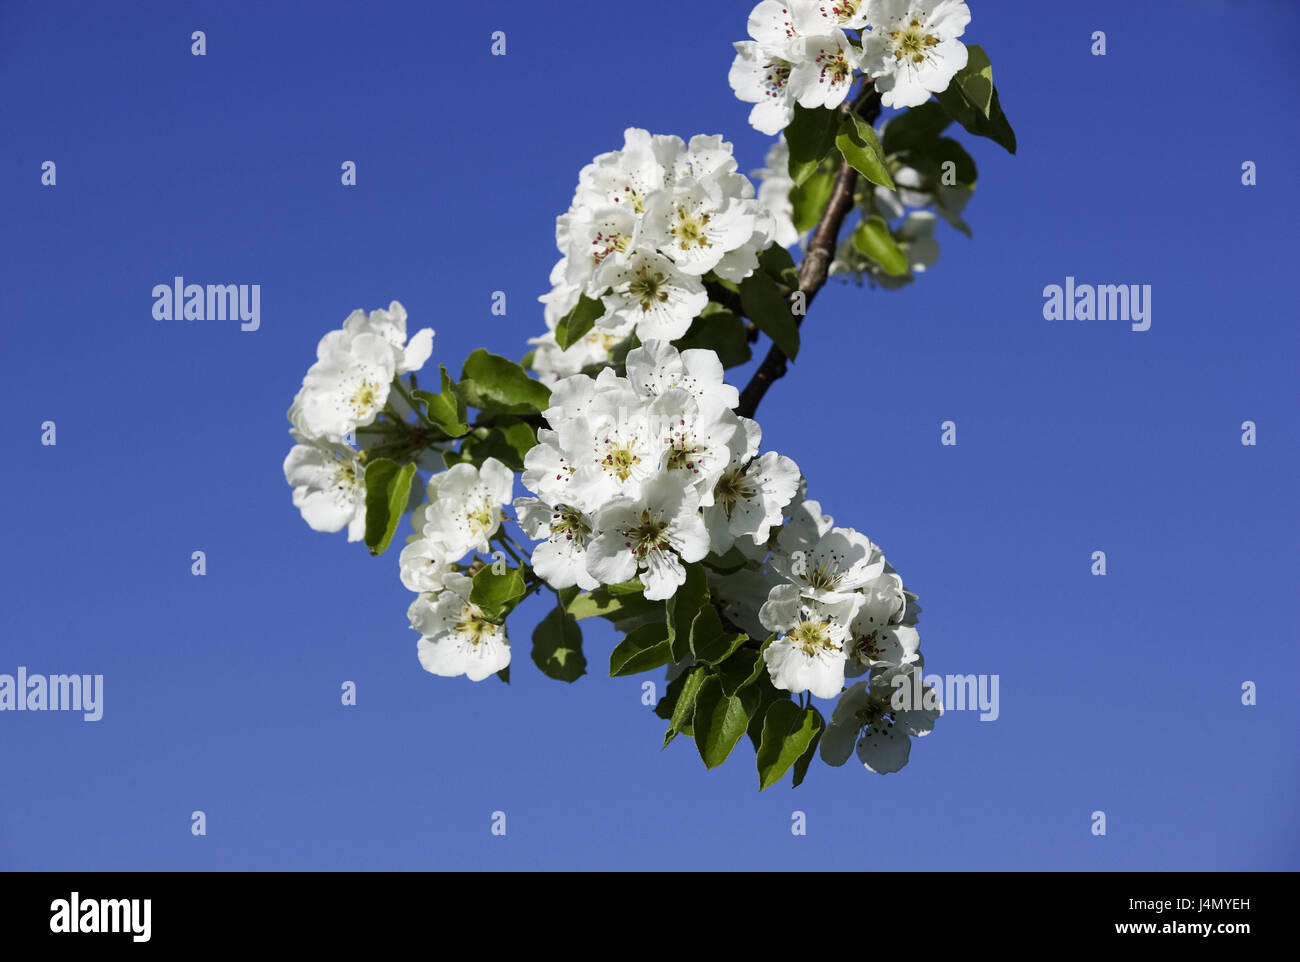 Pear tree, flowering branch, nature, plants, tree, fruit-tree, fruit juice pear, Pyrus, branch, blossoms, blossom, white, fruit blossom, sky, blue, spring, May, medium close-up, Stock Photo